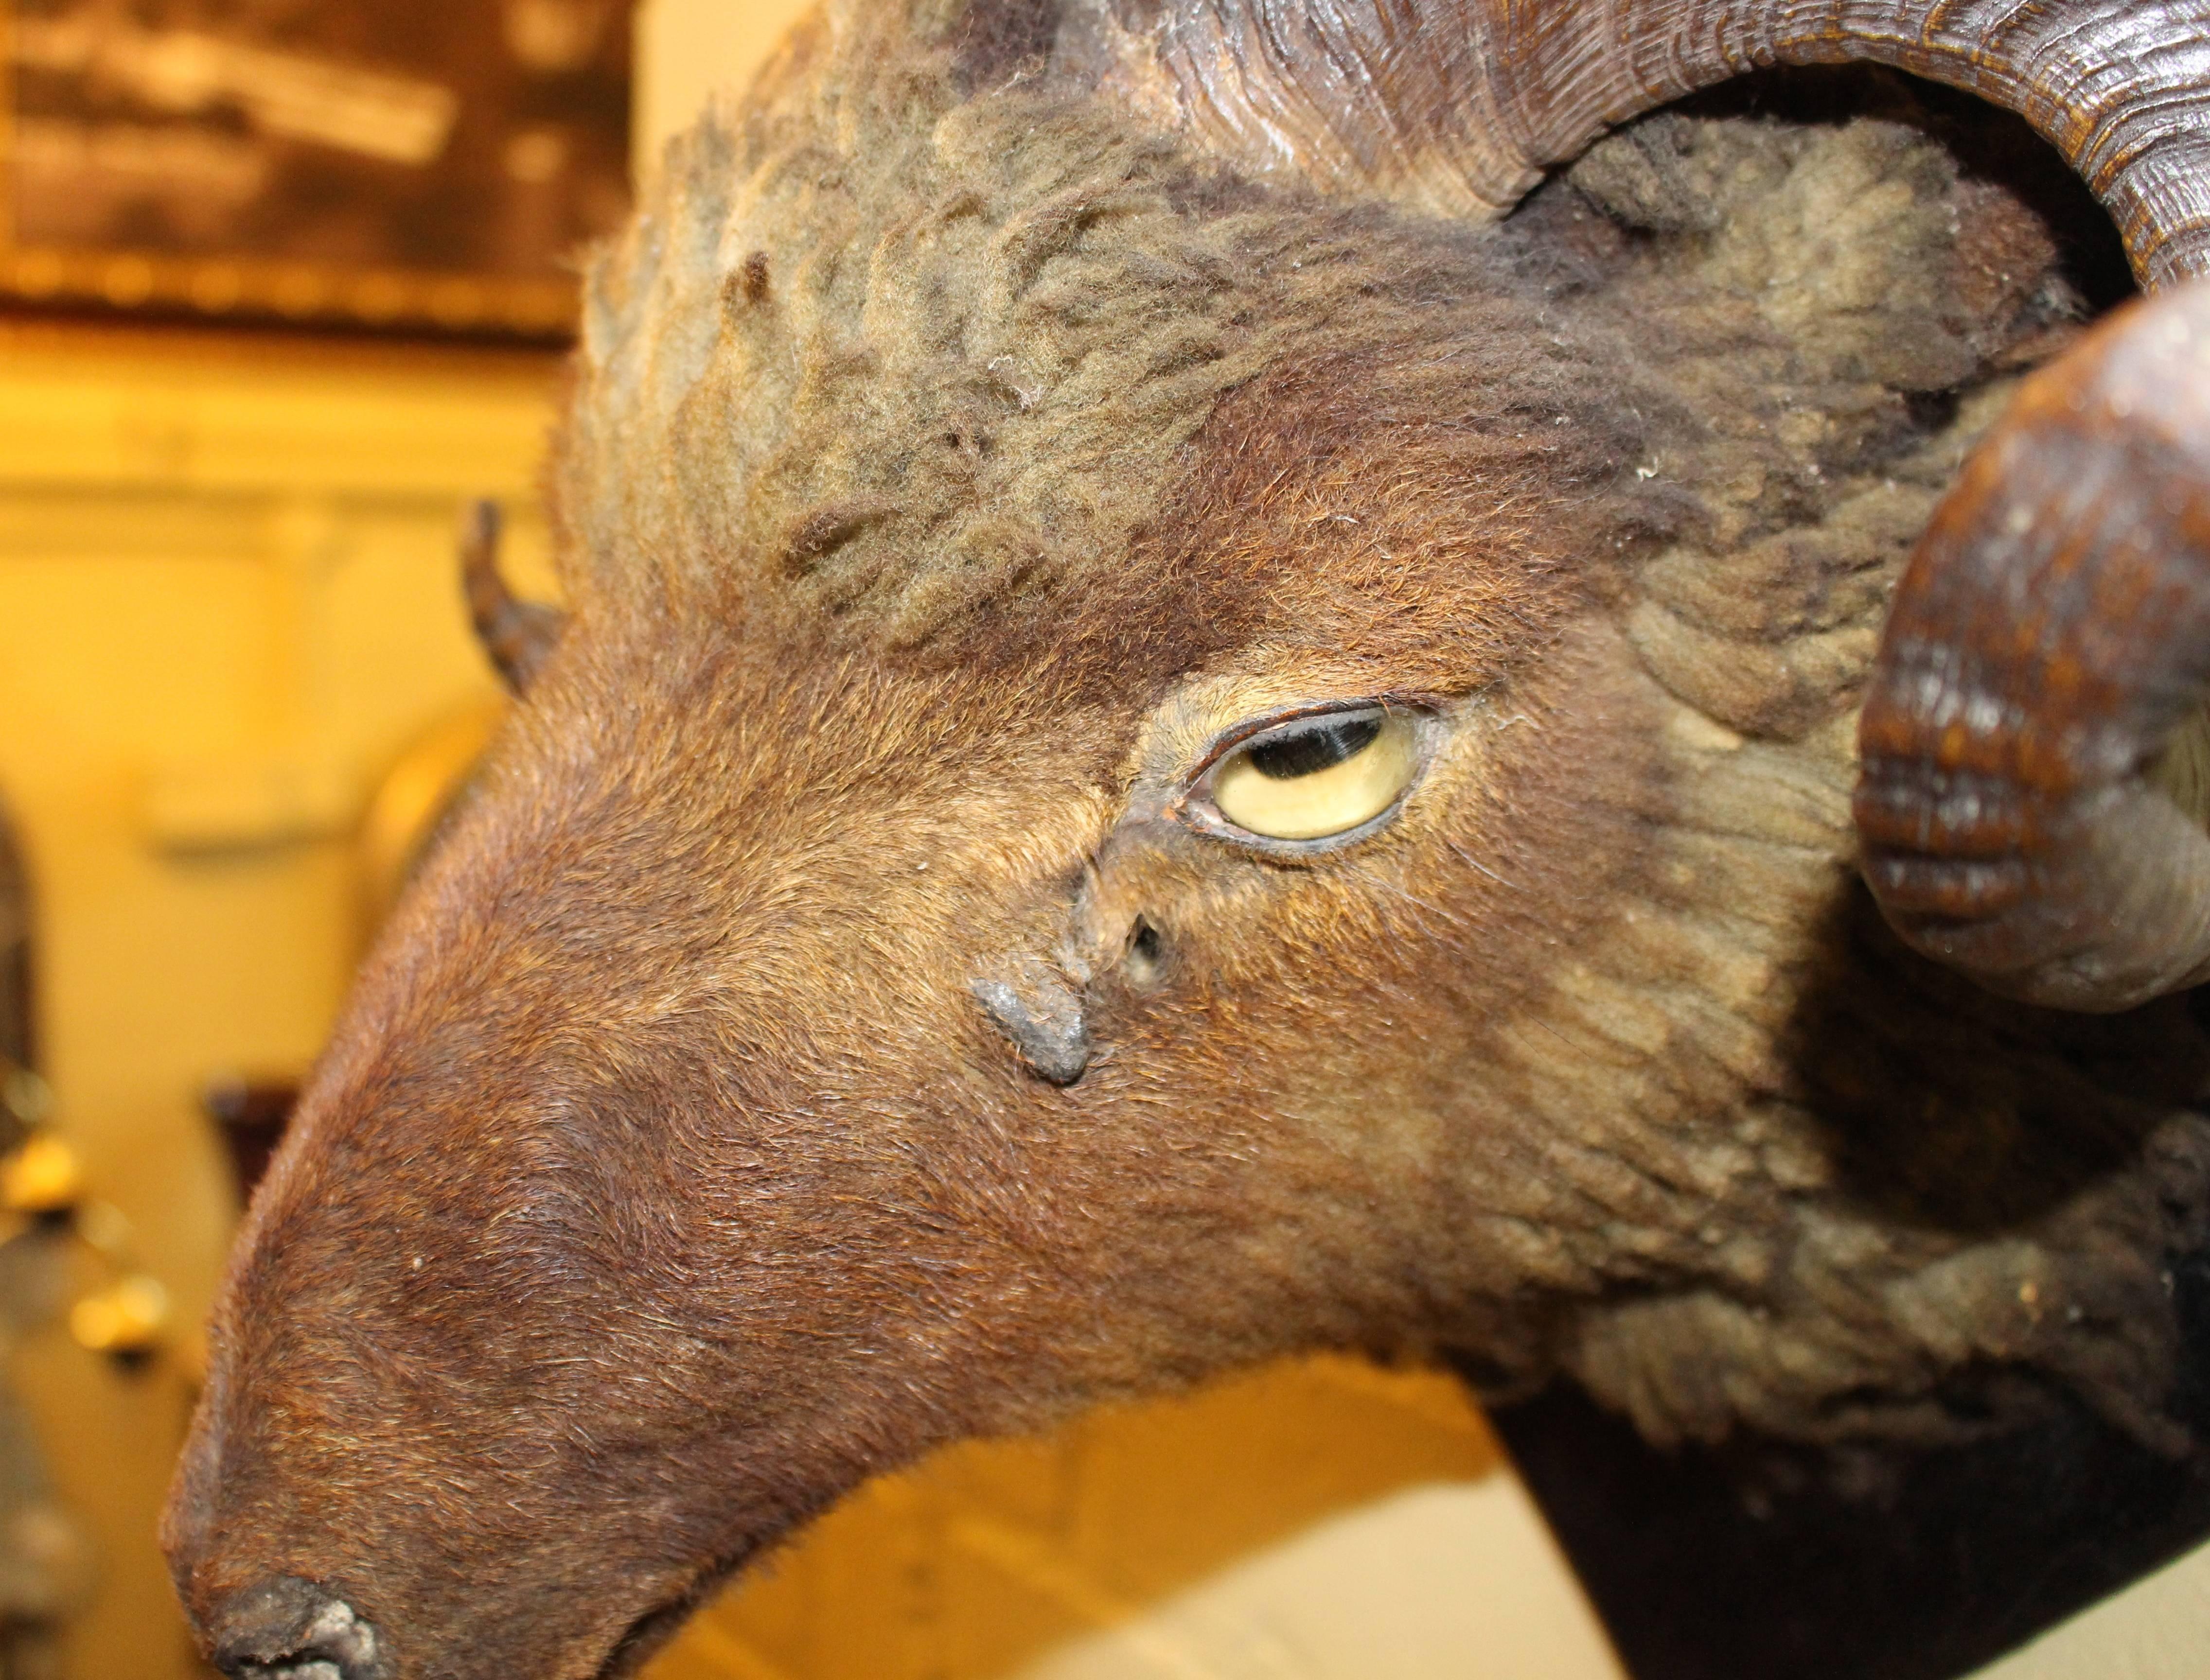 Mounted Antique Ram's Head Taxidermy 2